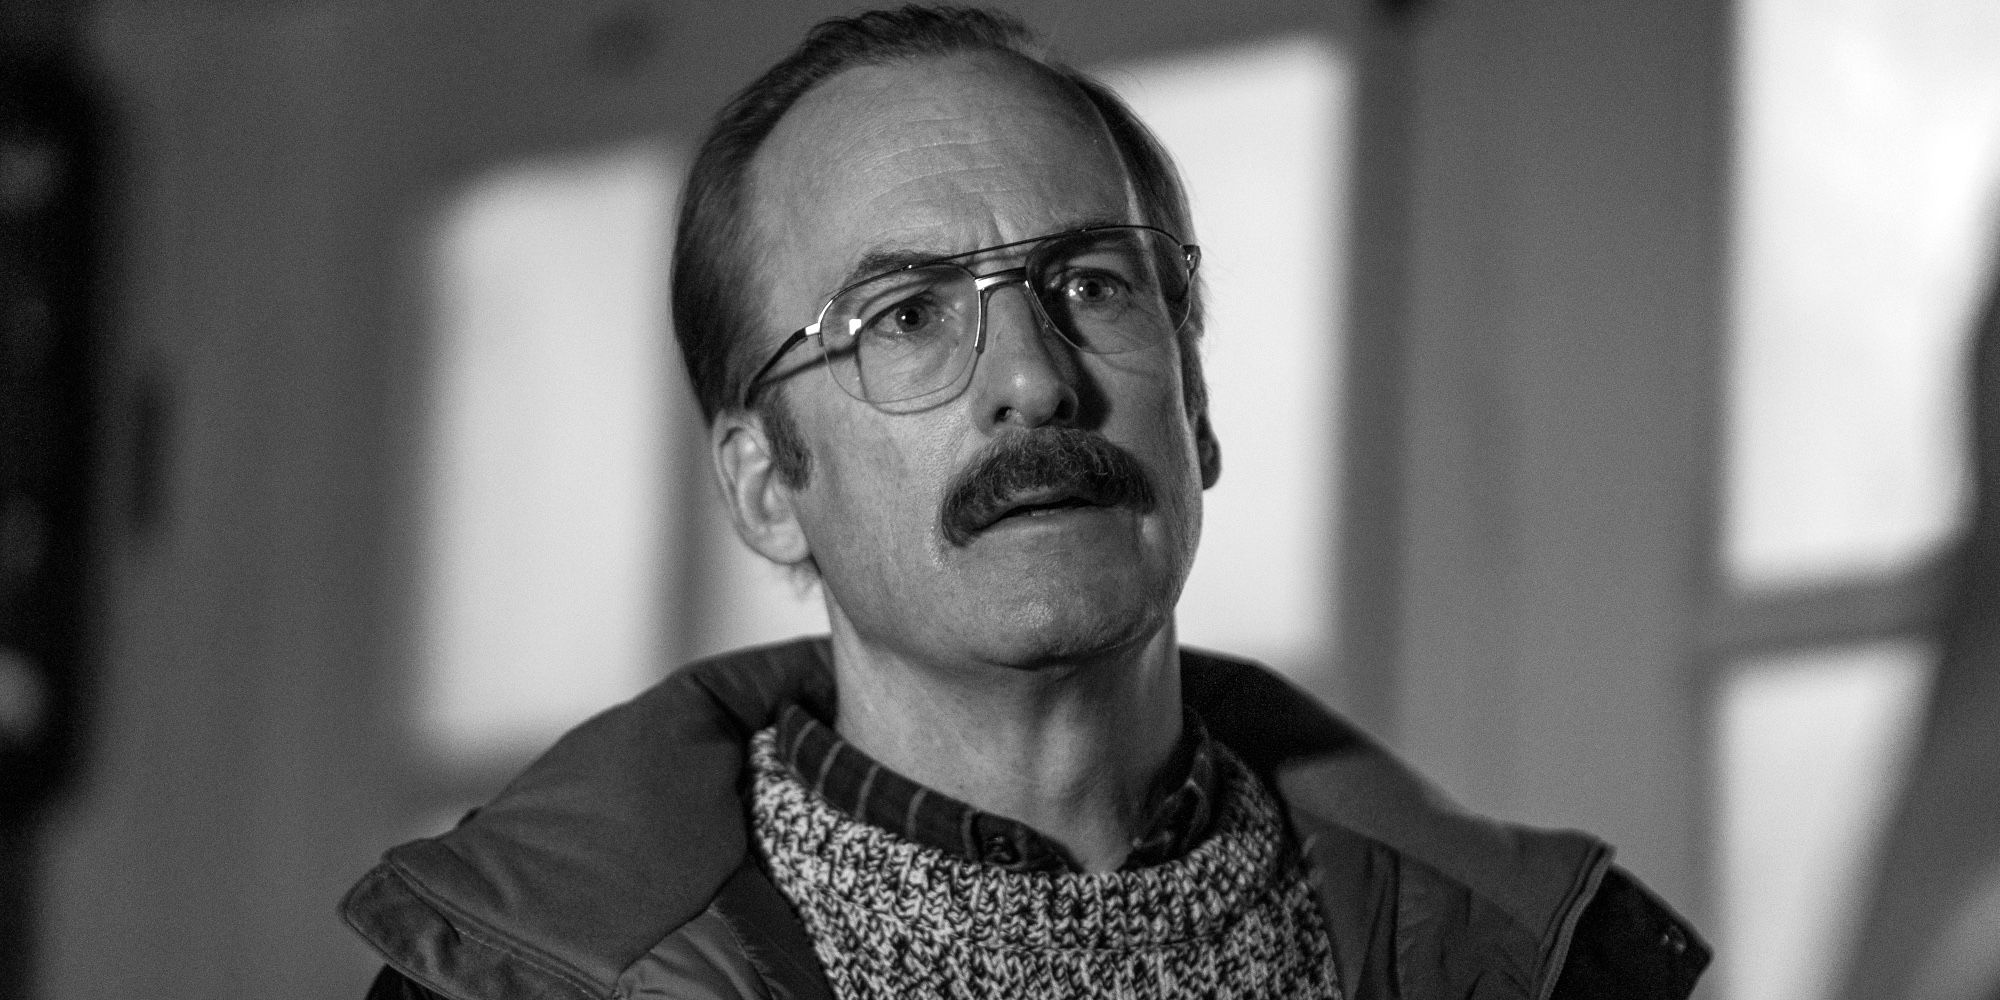 Gene in Better Call Saul in black and white, with a moustache and glasses, looking scared.